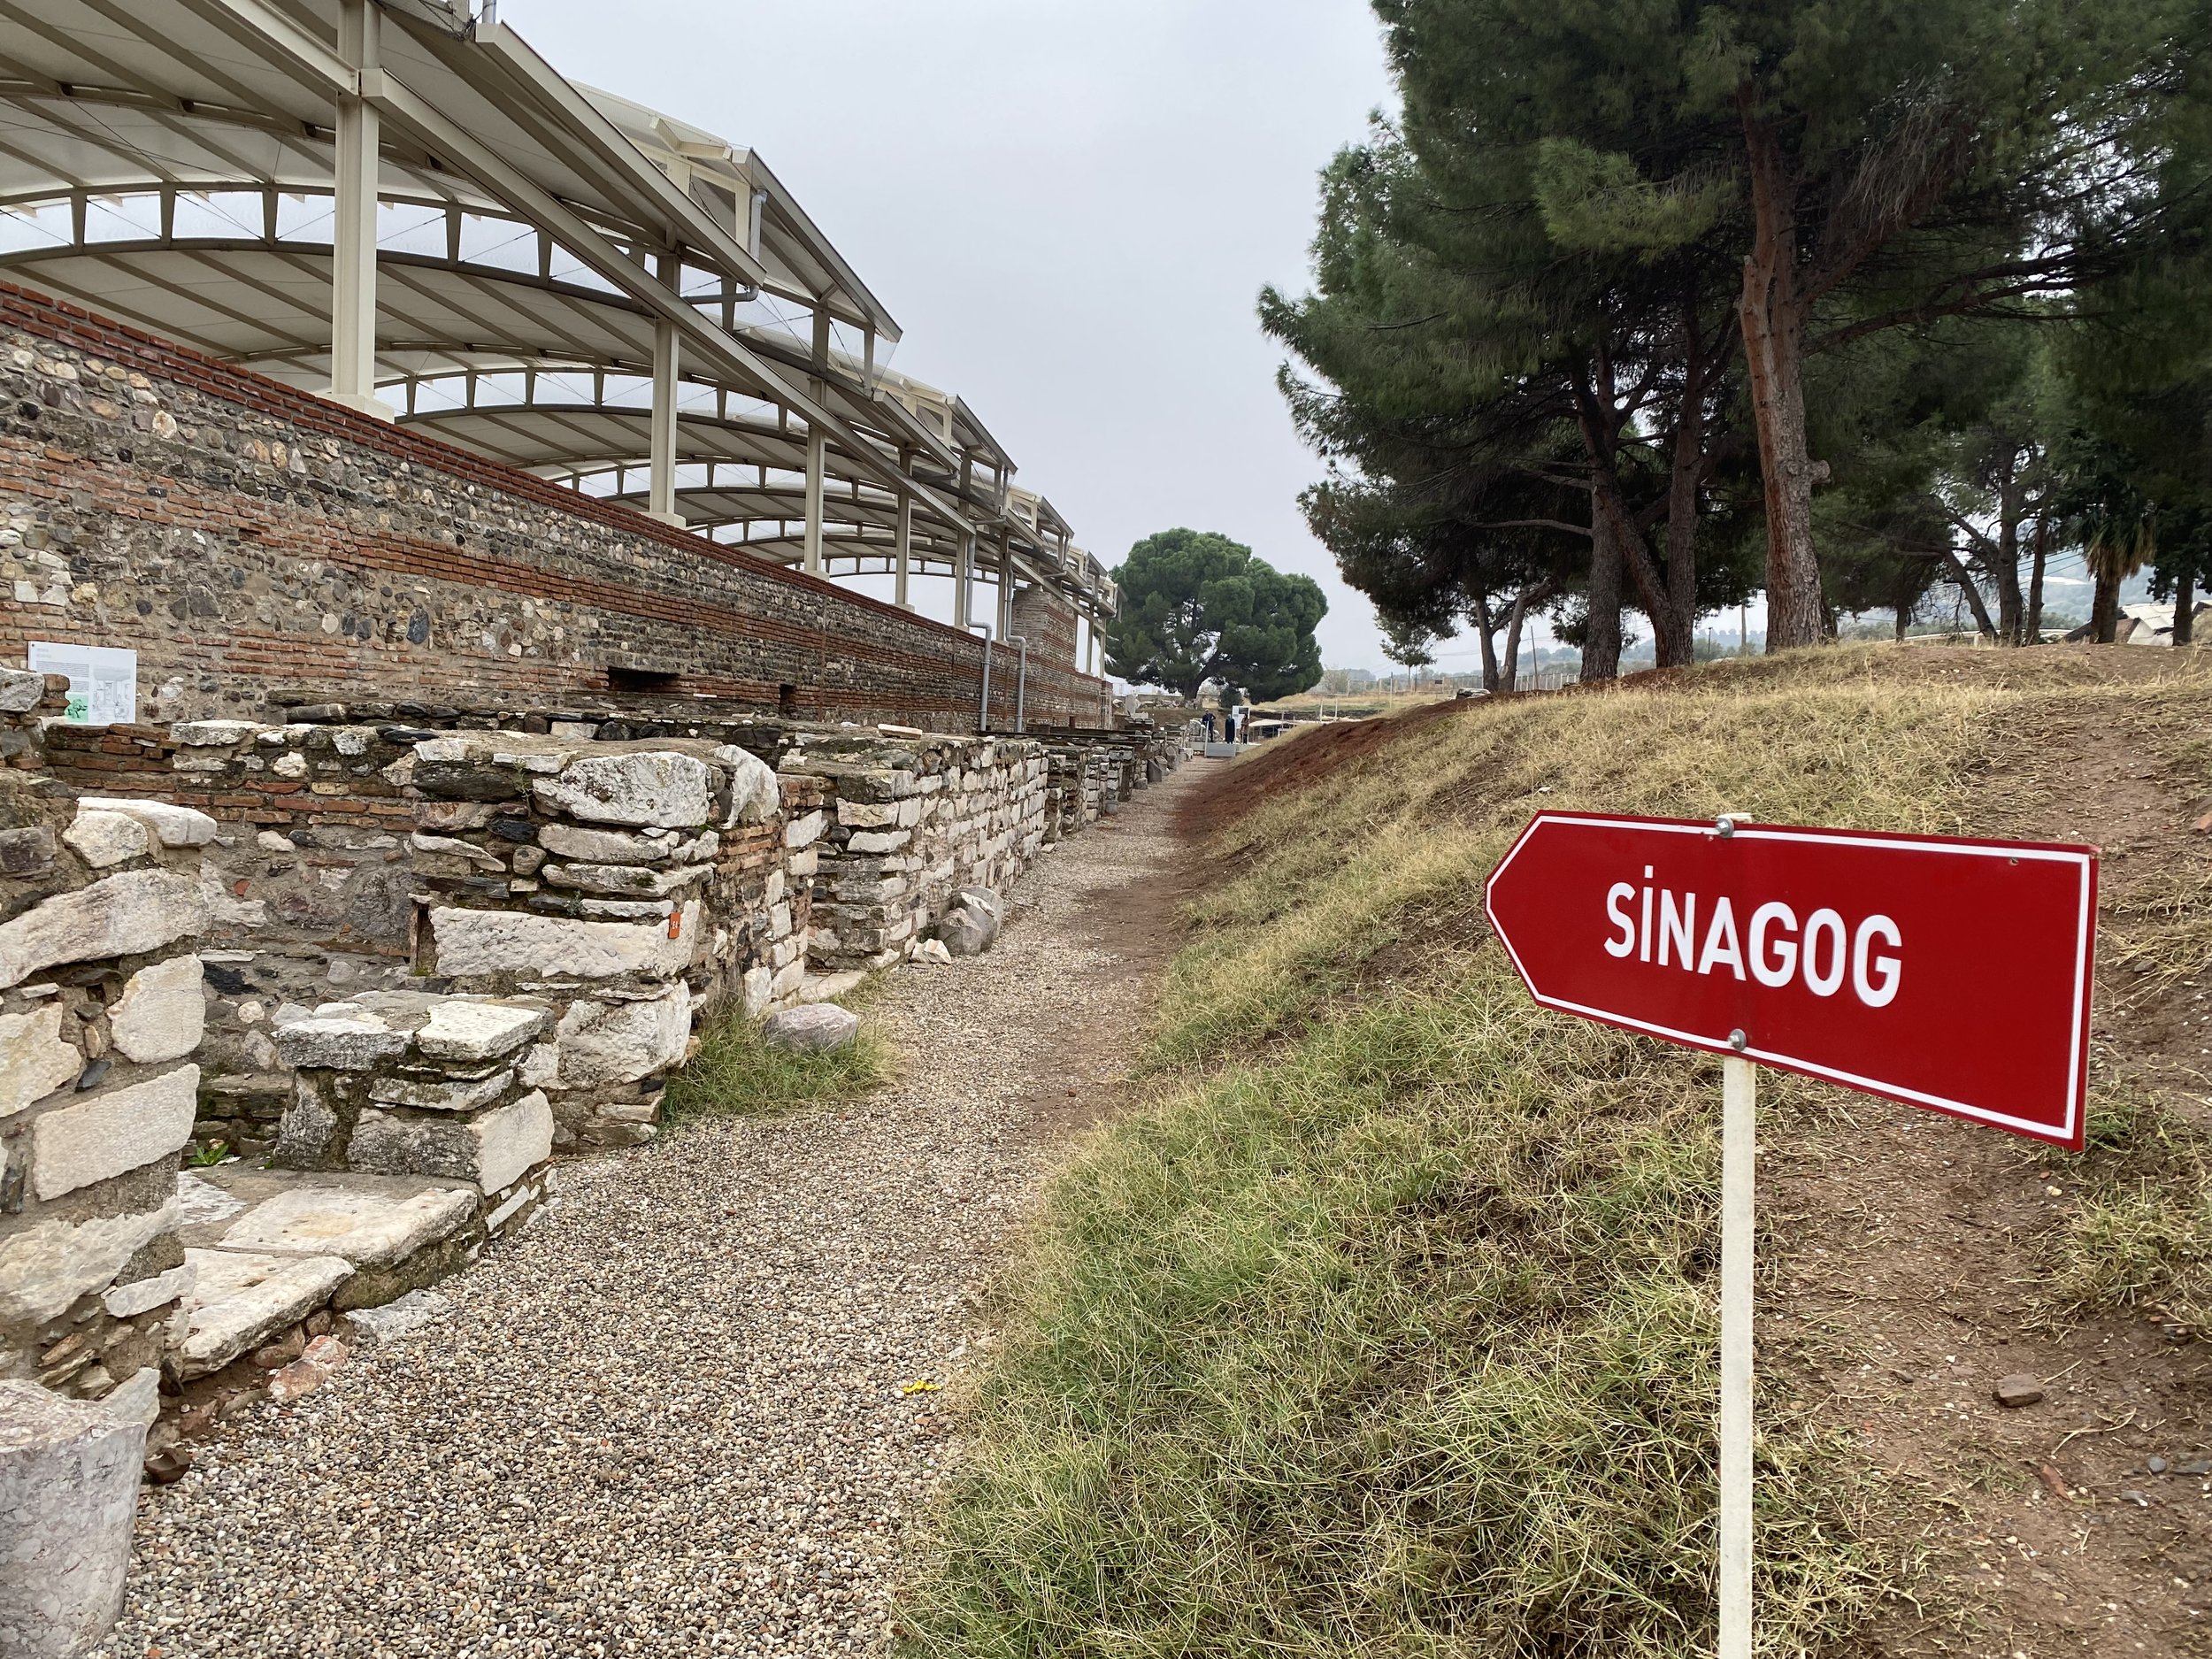 At the site of the ancient city of Sardis, archeologists found what is considered the oldest and largest synagogue outside of Israel.